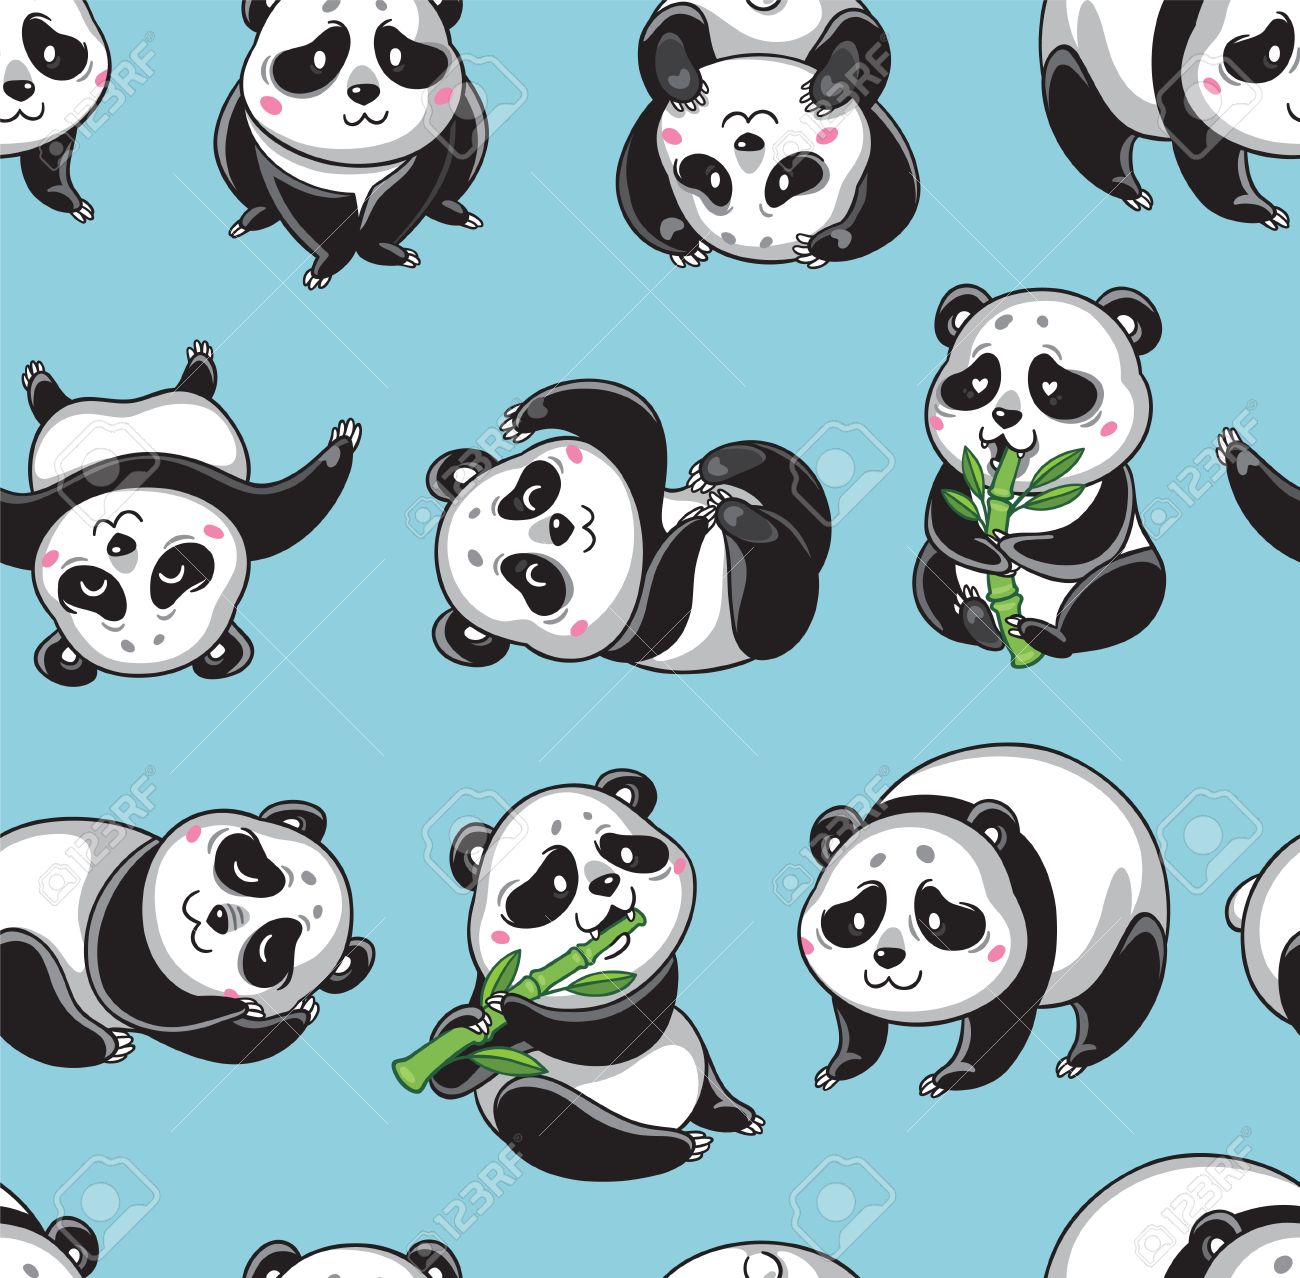 Seamless Cartoon Wallpaper With Cute Pandas Isolated On Blue